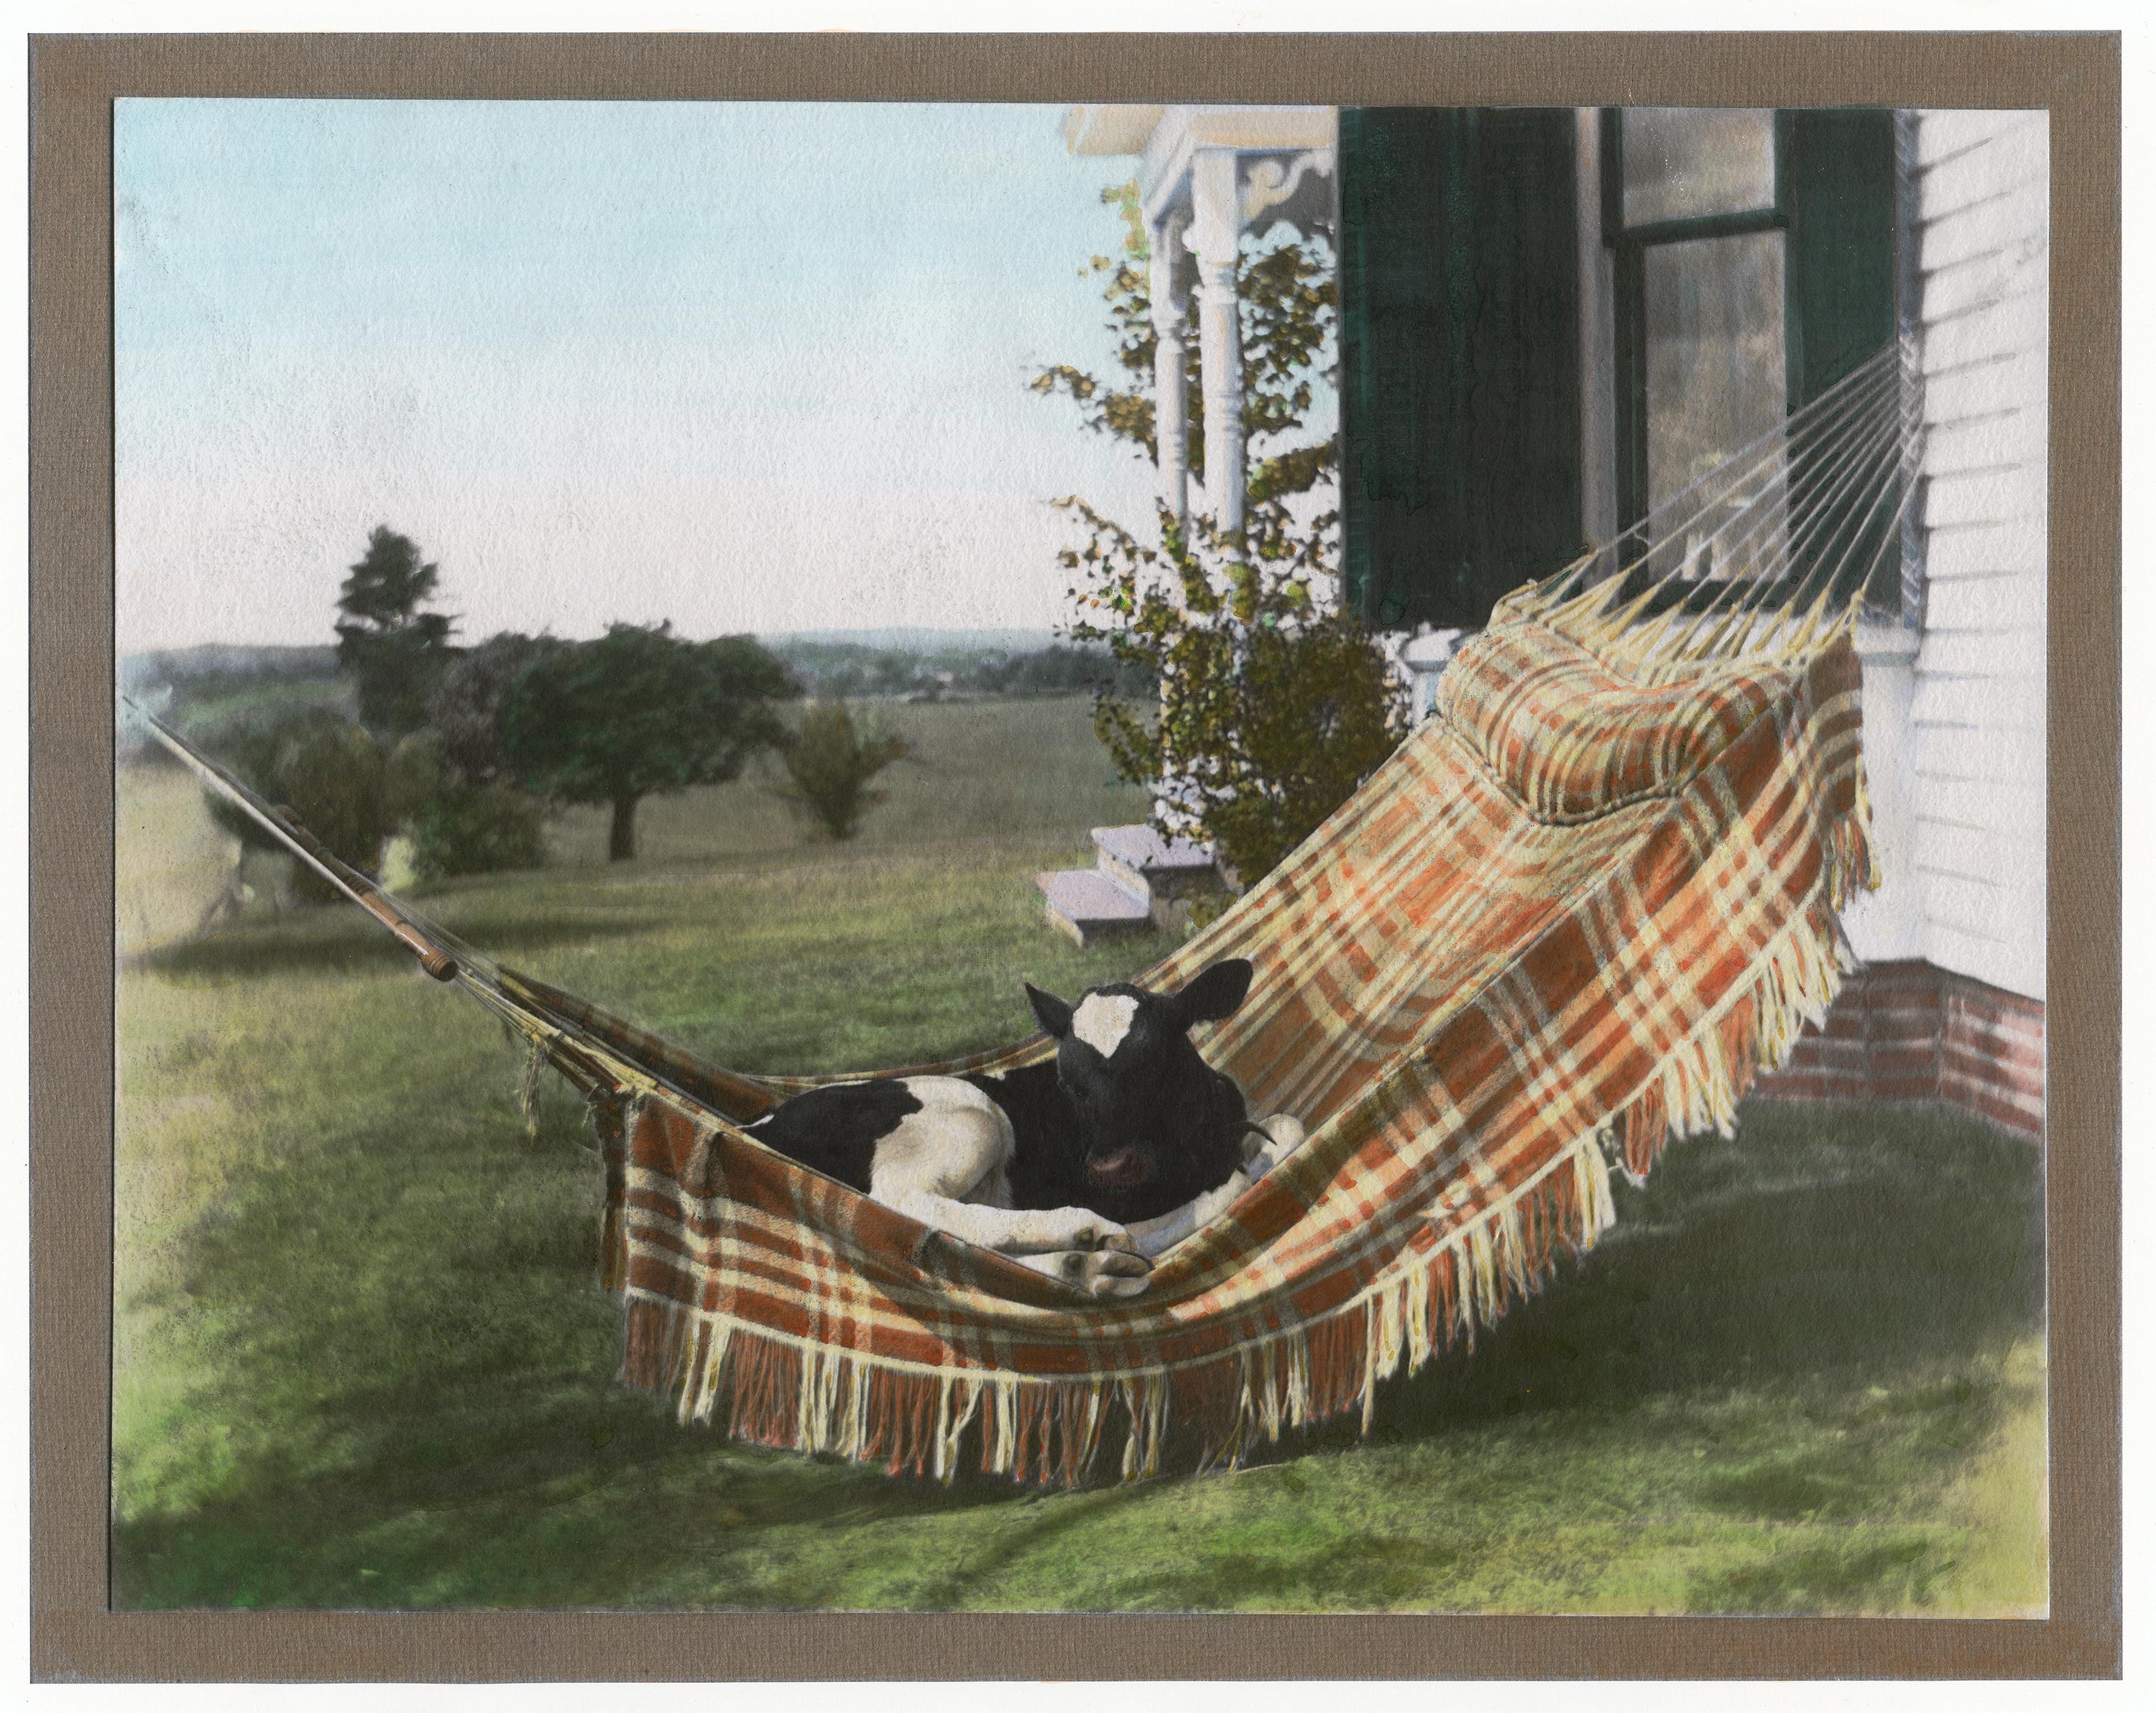 Unknown Black and White Photograph - Cow in Hammock